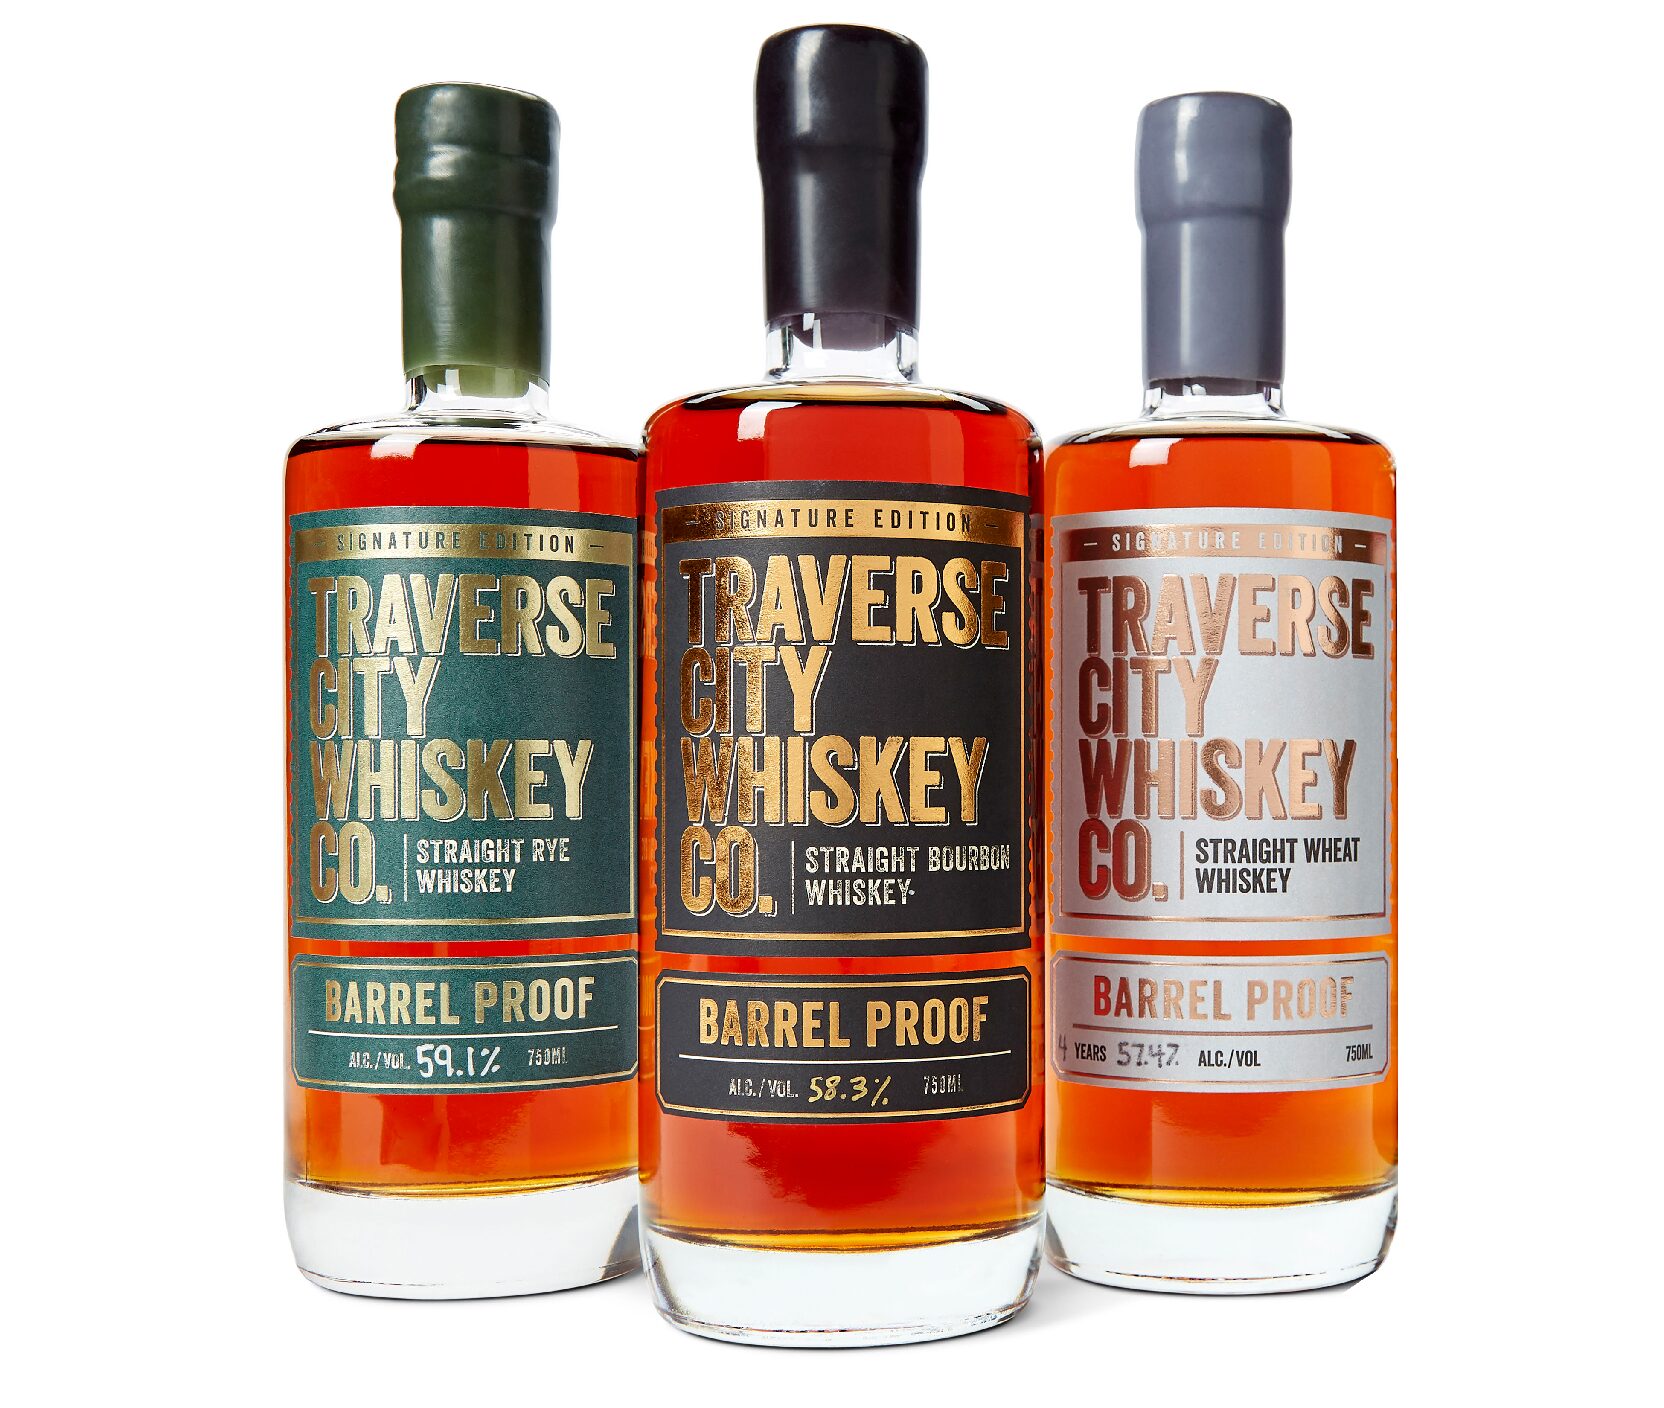 Traverse City Whiskey Co. Awarded Double Gold Medals for its Barrel Proof Rye Whiskey and Barrel Proof Wheat Whiskey at the 2022 San Francisco World Spirits Competition